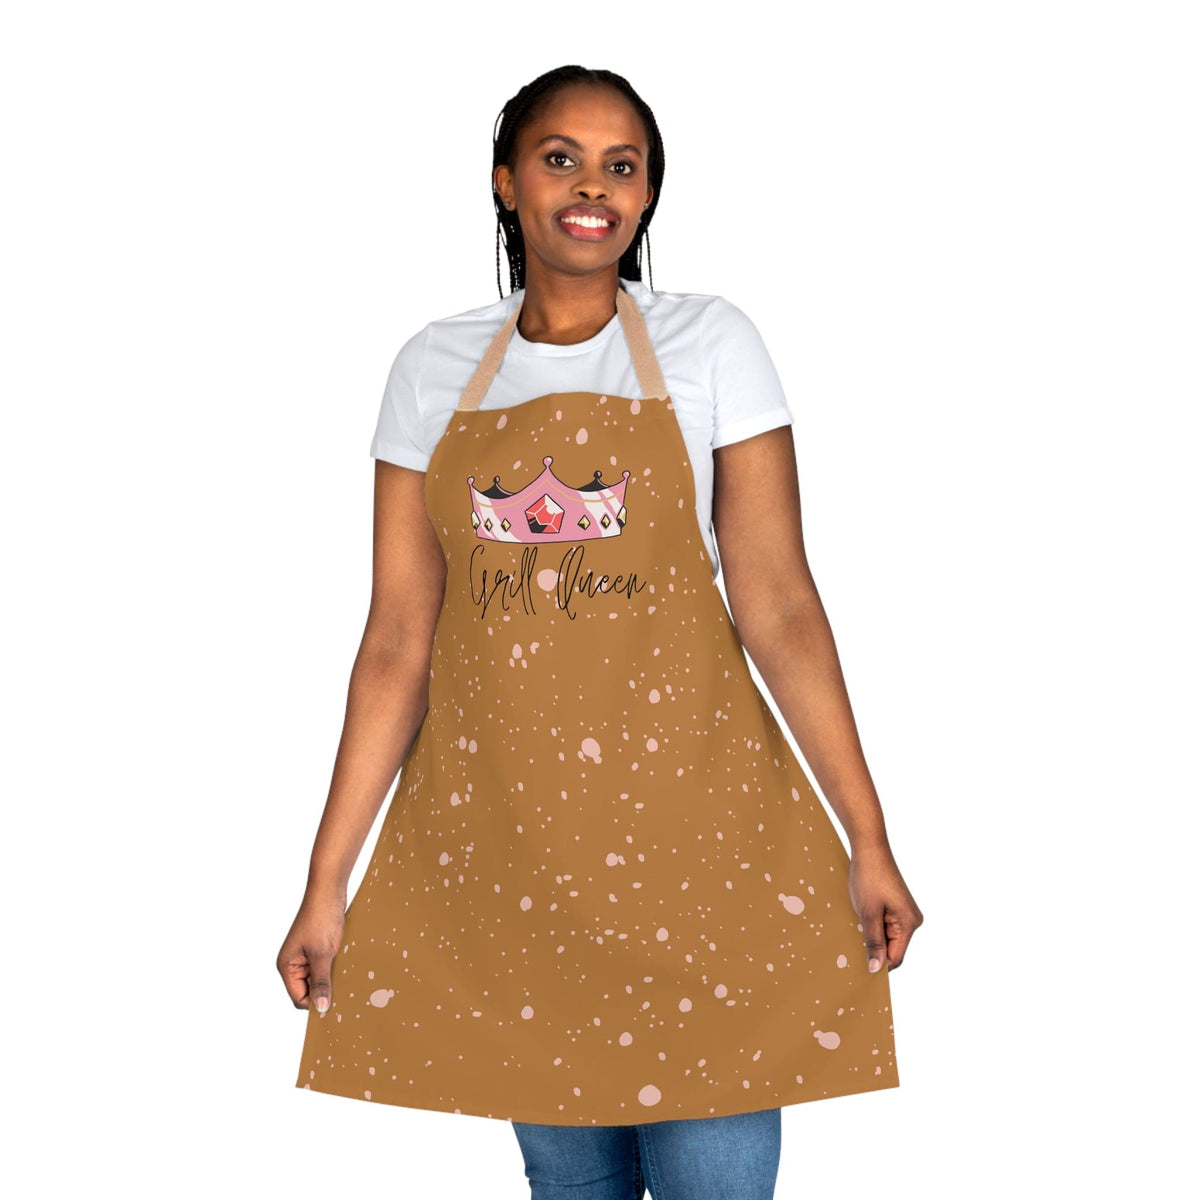 &quot;Grill Queen&quot; Cooking Apron For Women